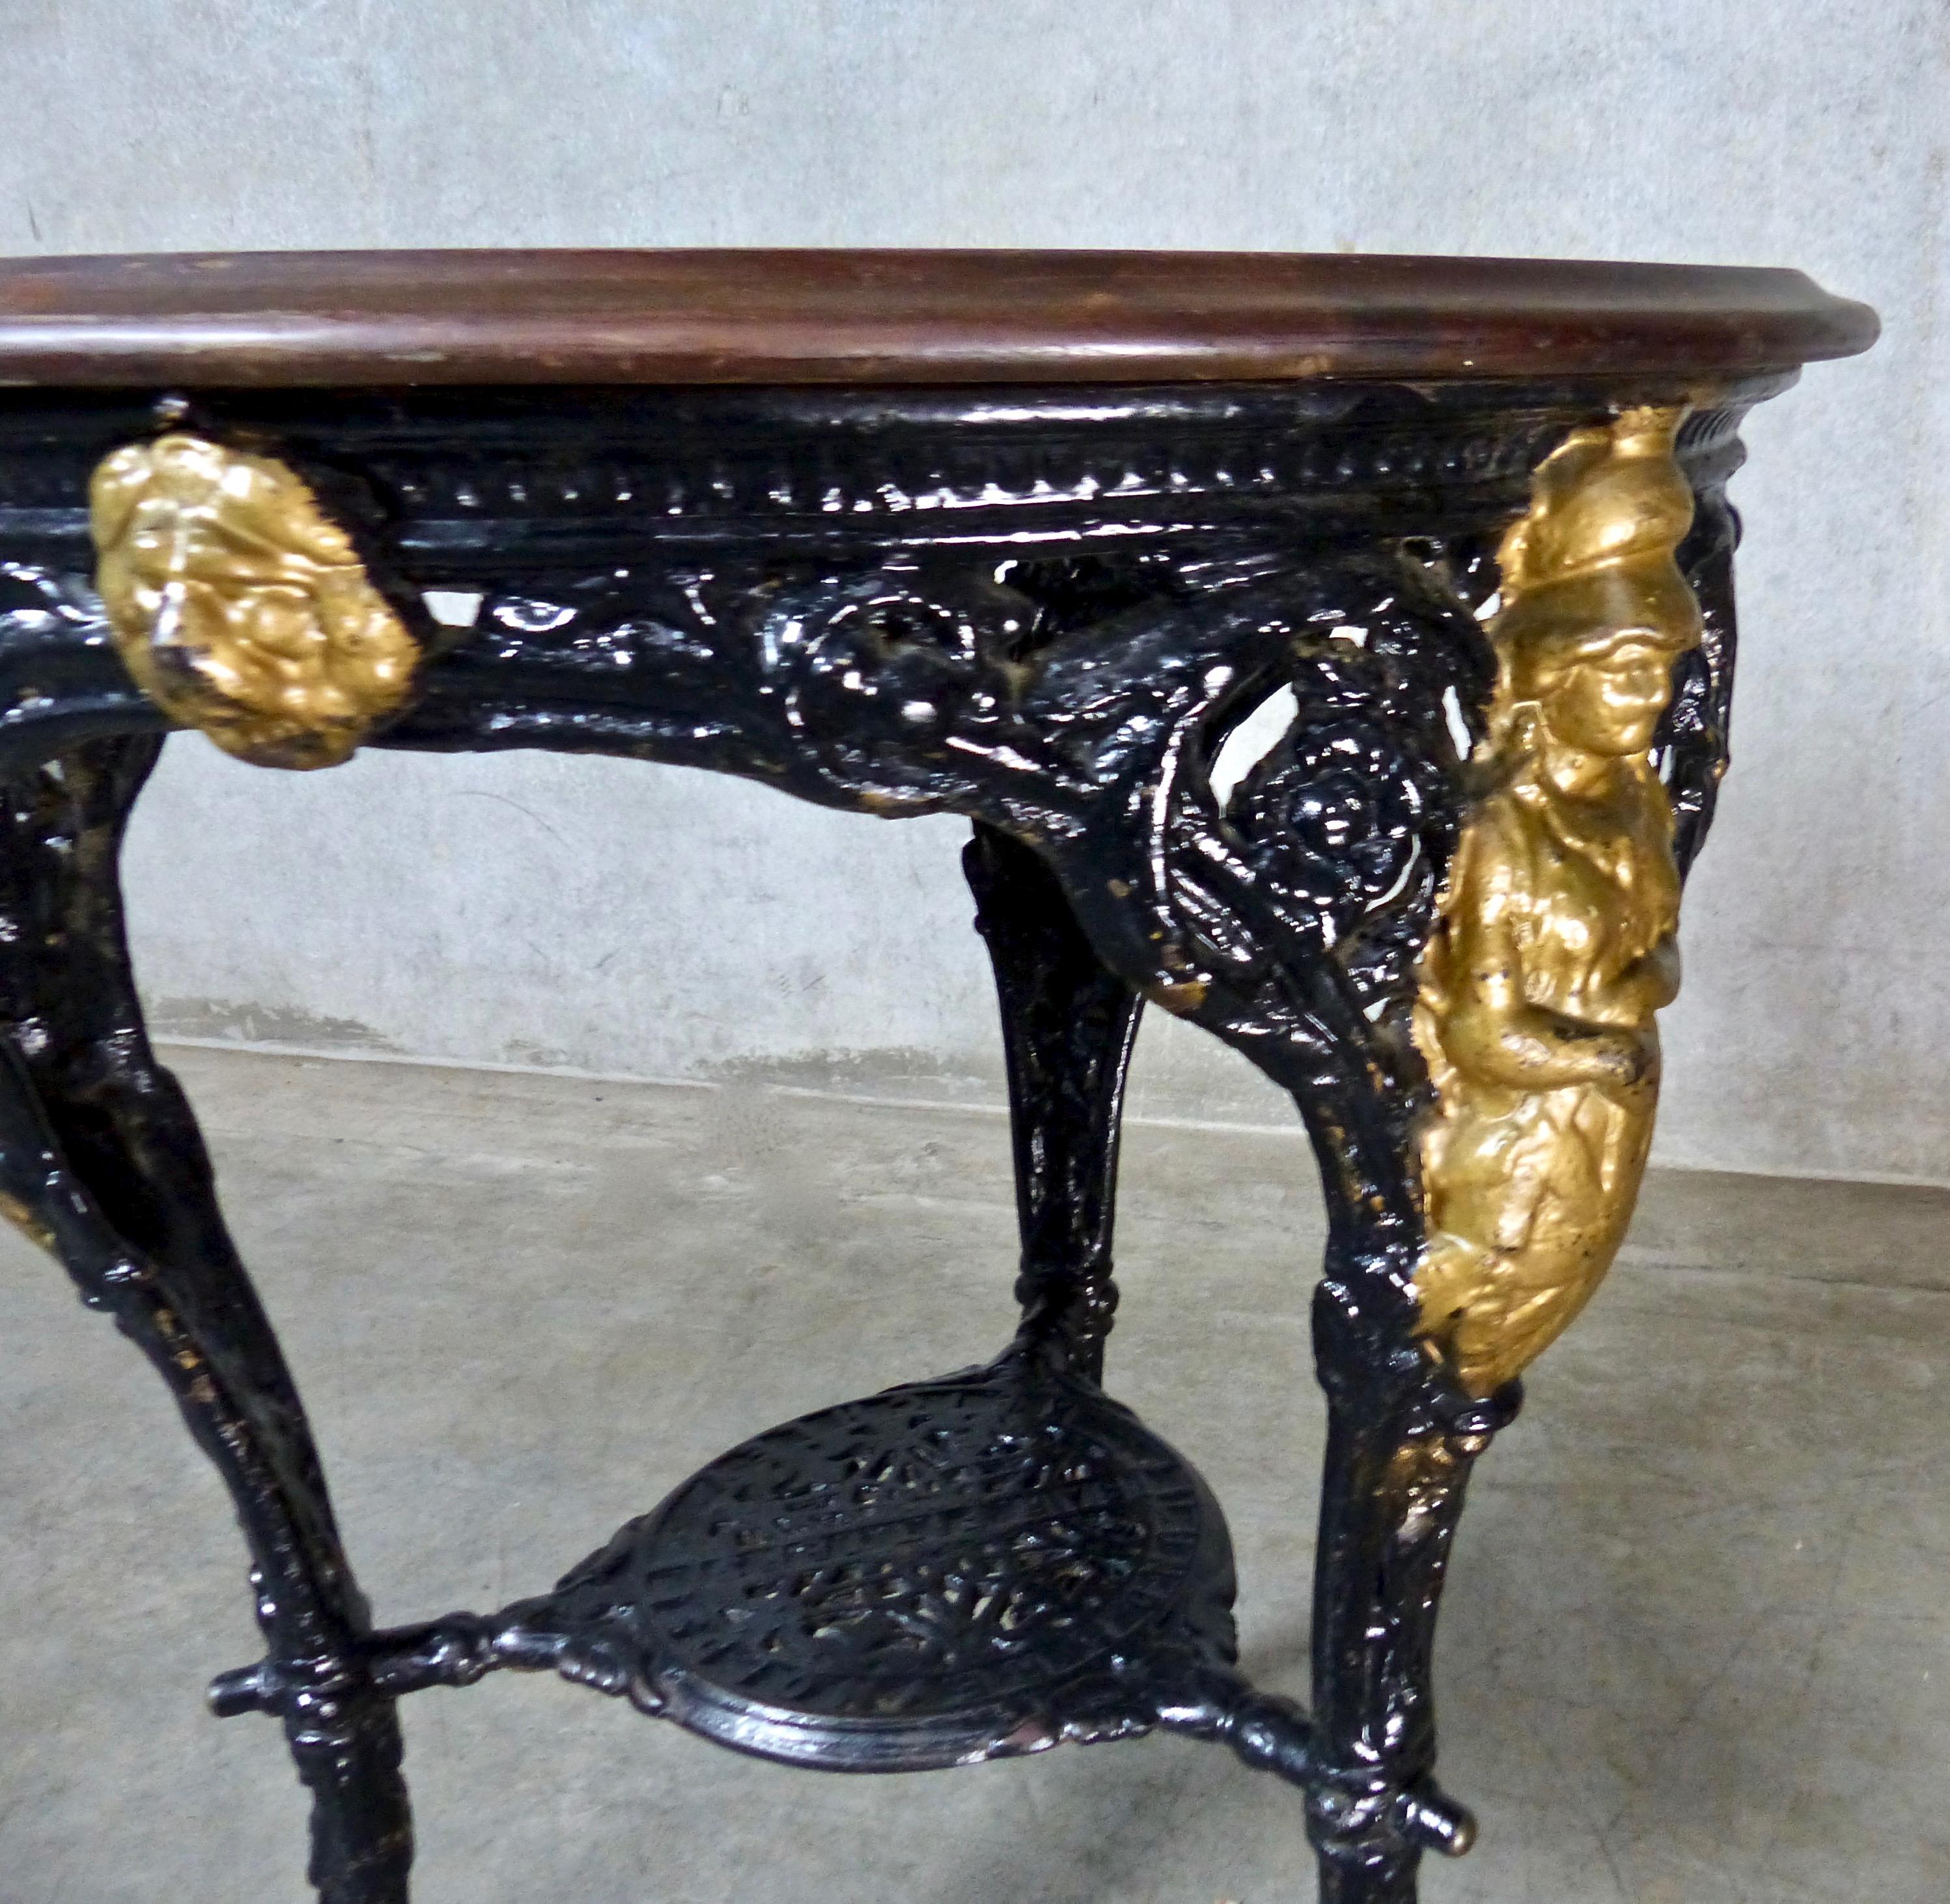 A circa 1900, ornate, three-legged, cast iron round pub table by Lund & Reynolds Ltd. of Bradford, England. Some gilt statuary details, lion’s paw feet, and solid mahogany top. Suitable as a statement-making centre, entry hall, or console